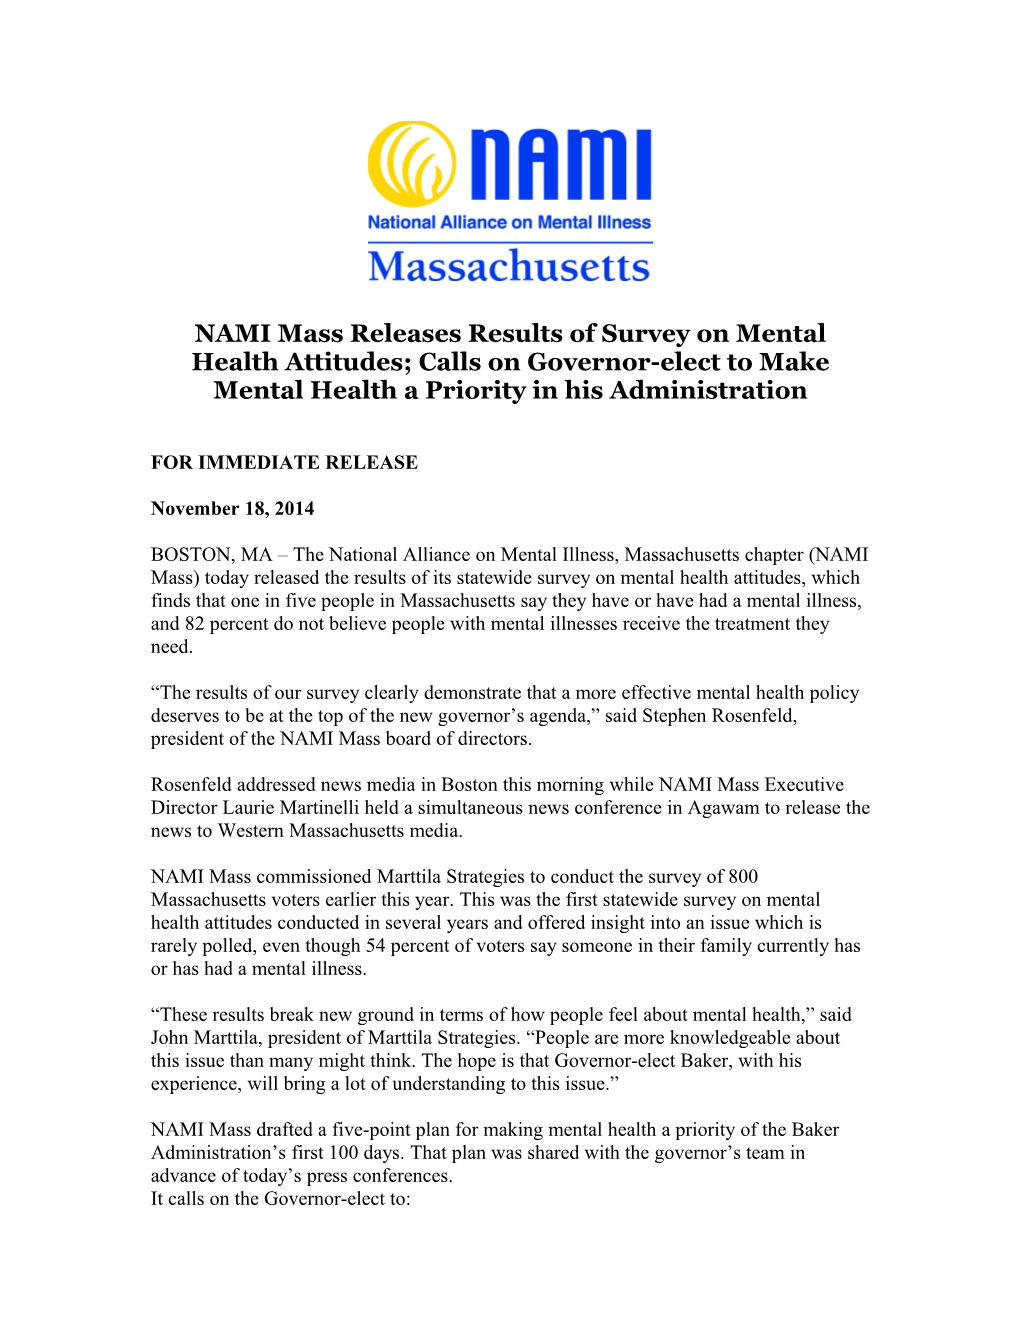 NAMI Mass Releases Results of Survey on Mental Health Attitudes; Calls on Governor-Elect